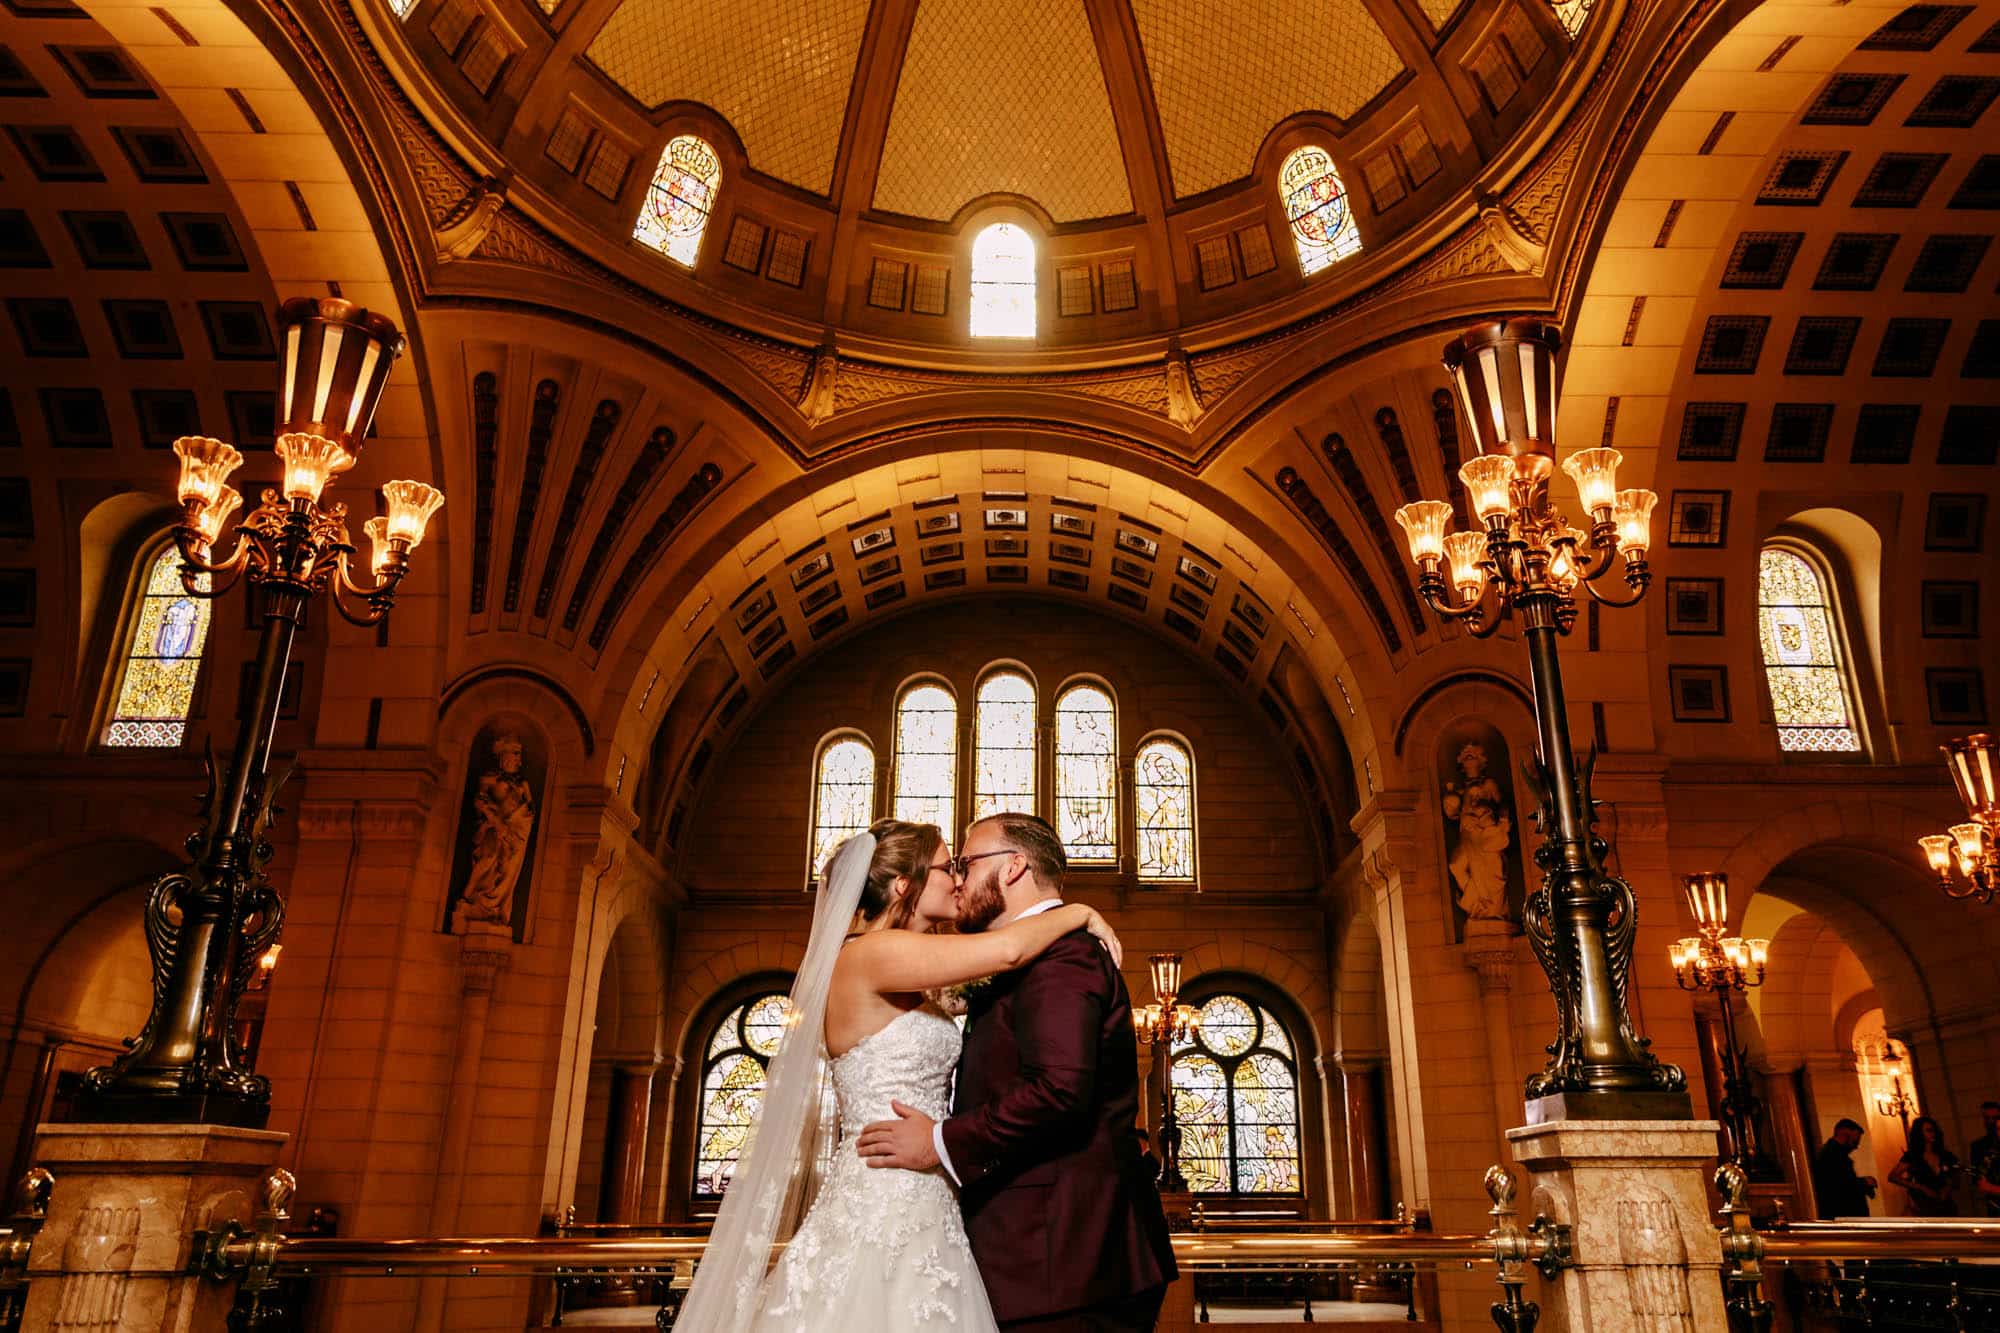 A bride and groom kissing each other passionately during their wedding ceremony in a charming church in Rotterdam.